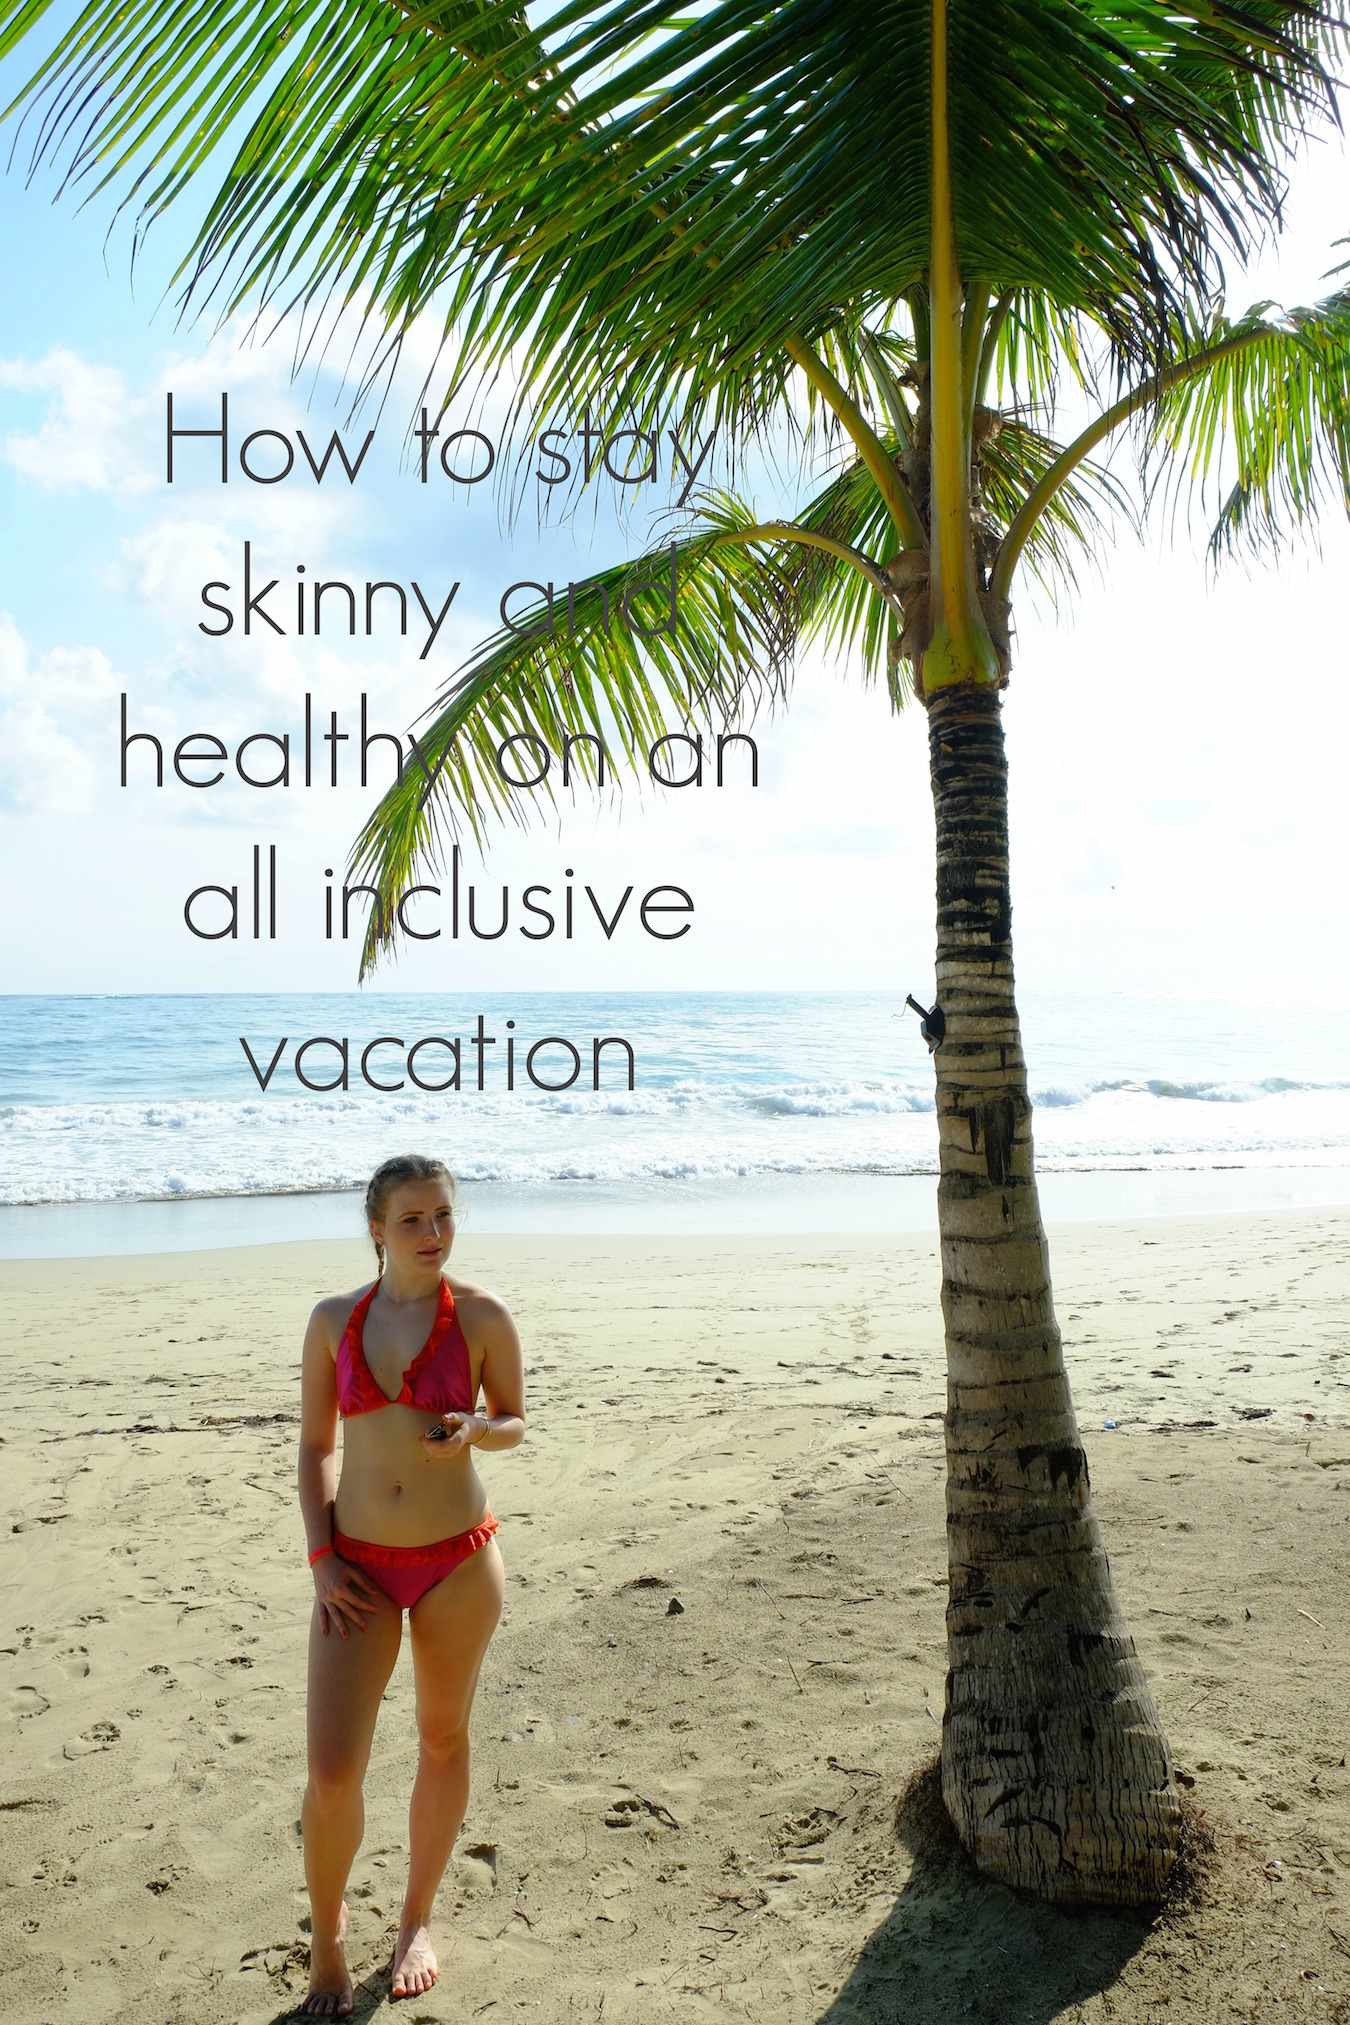 How-to-stay-skinny-and-healthy-on-an-all-inclusive-vacation